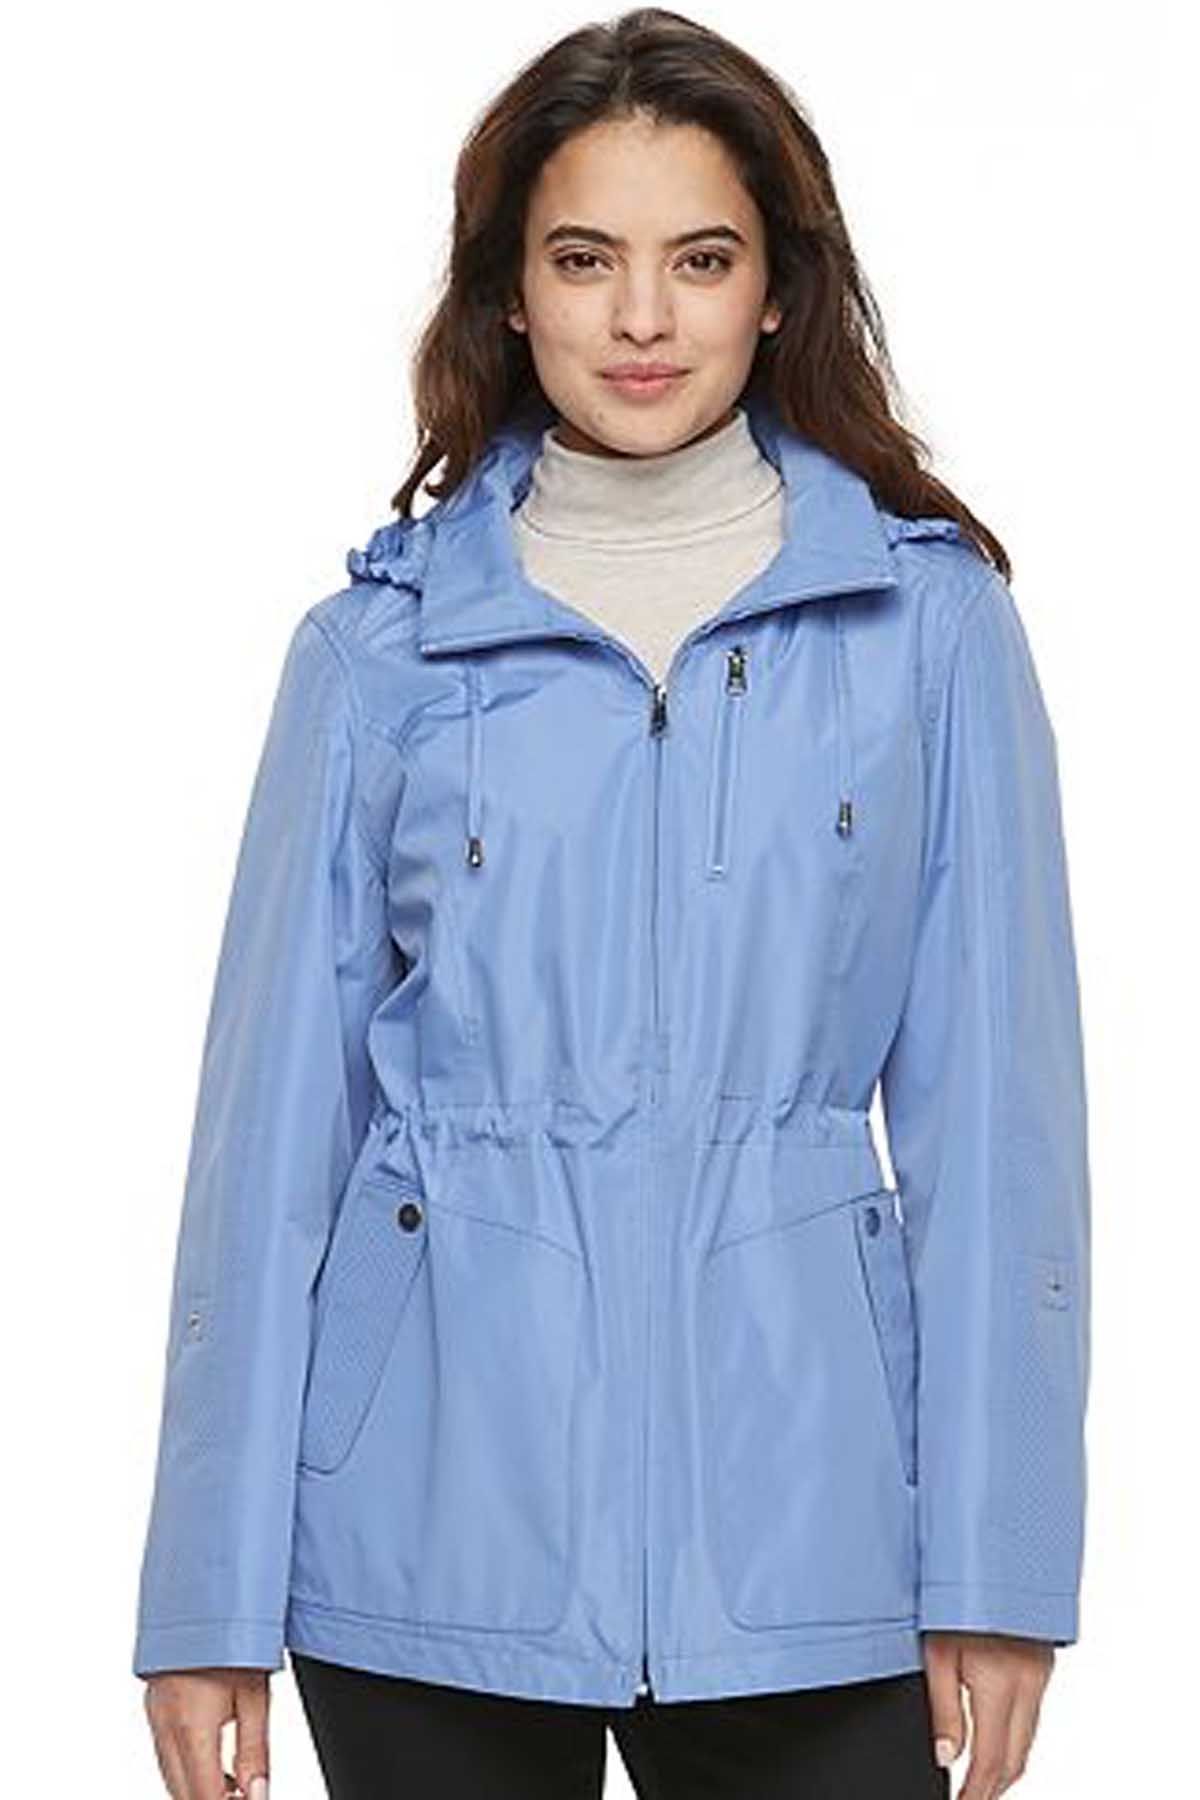 Women's Parka, Breathable Jackets, Spring Jackets | Geox ®